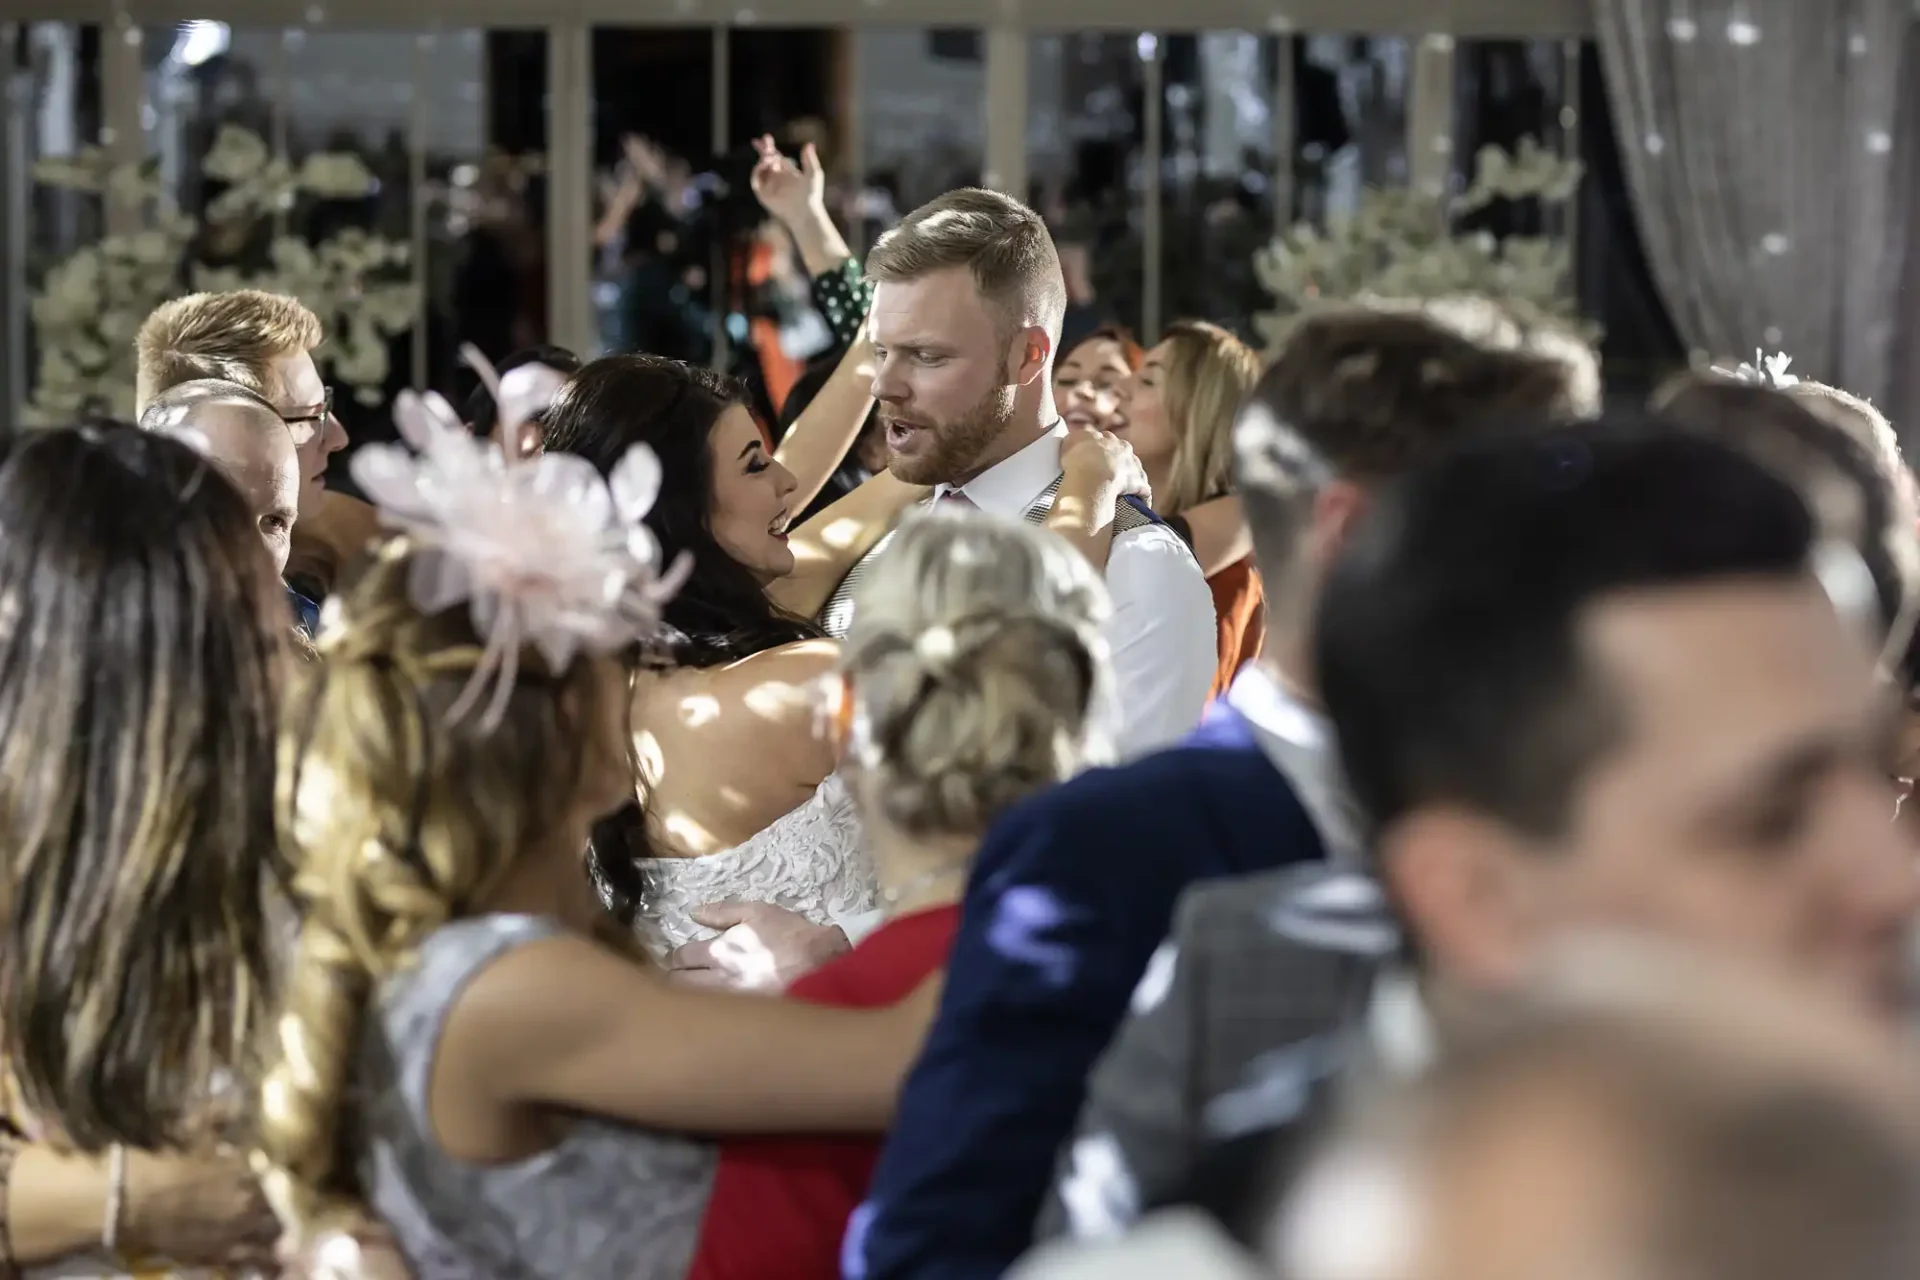 A joyful bride and groom kiss while dancing at their wedding reception, surrounded by cheerful guests.